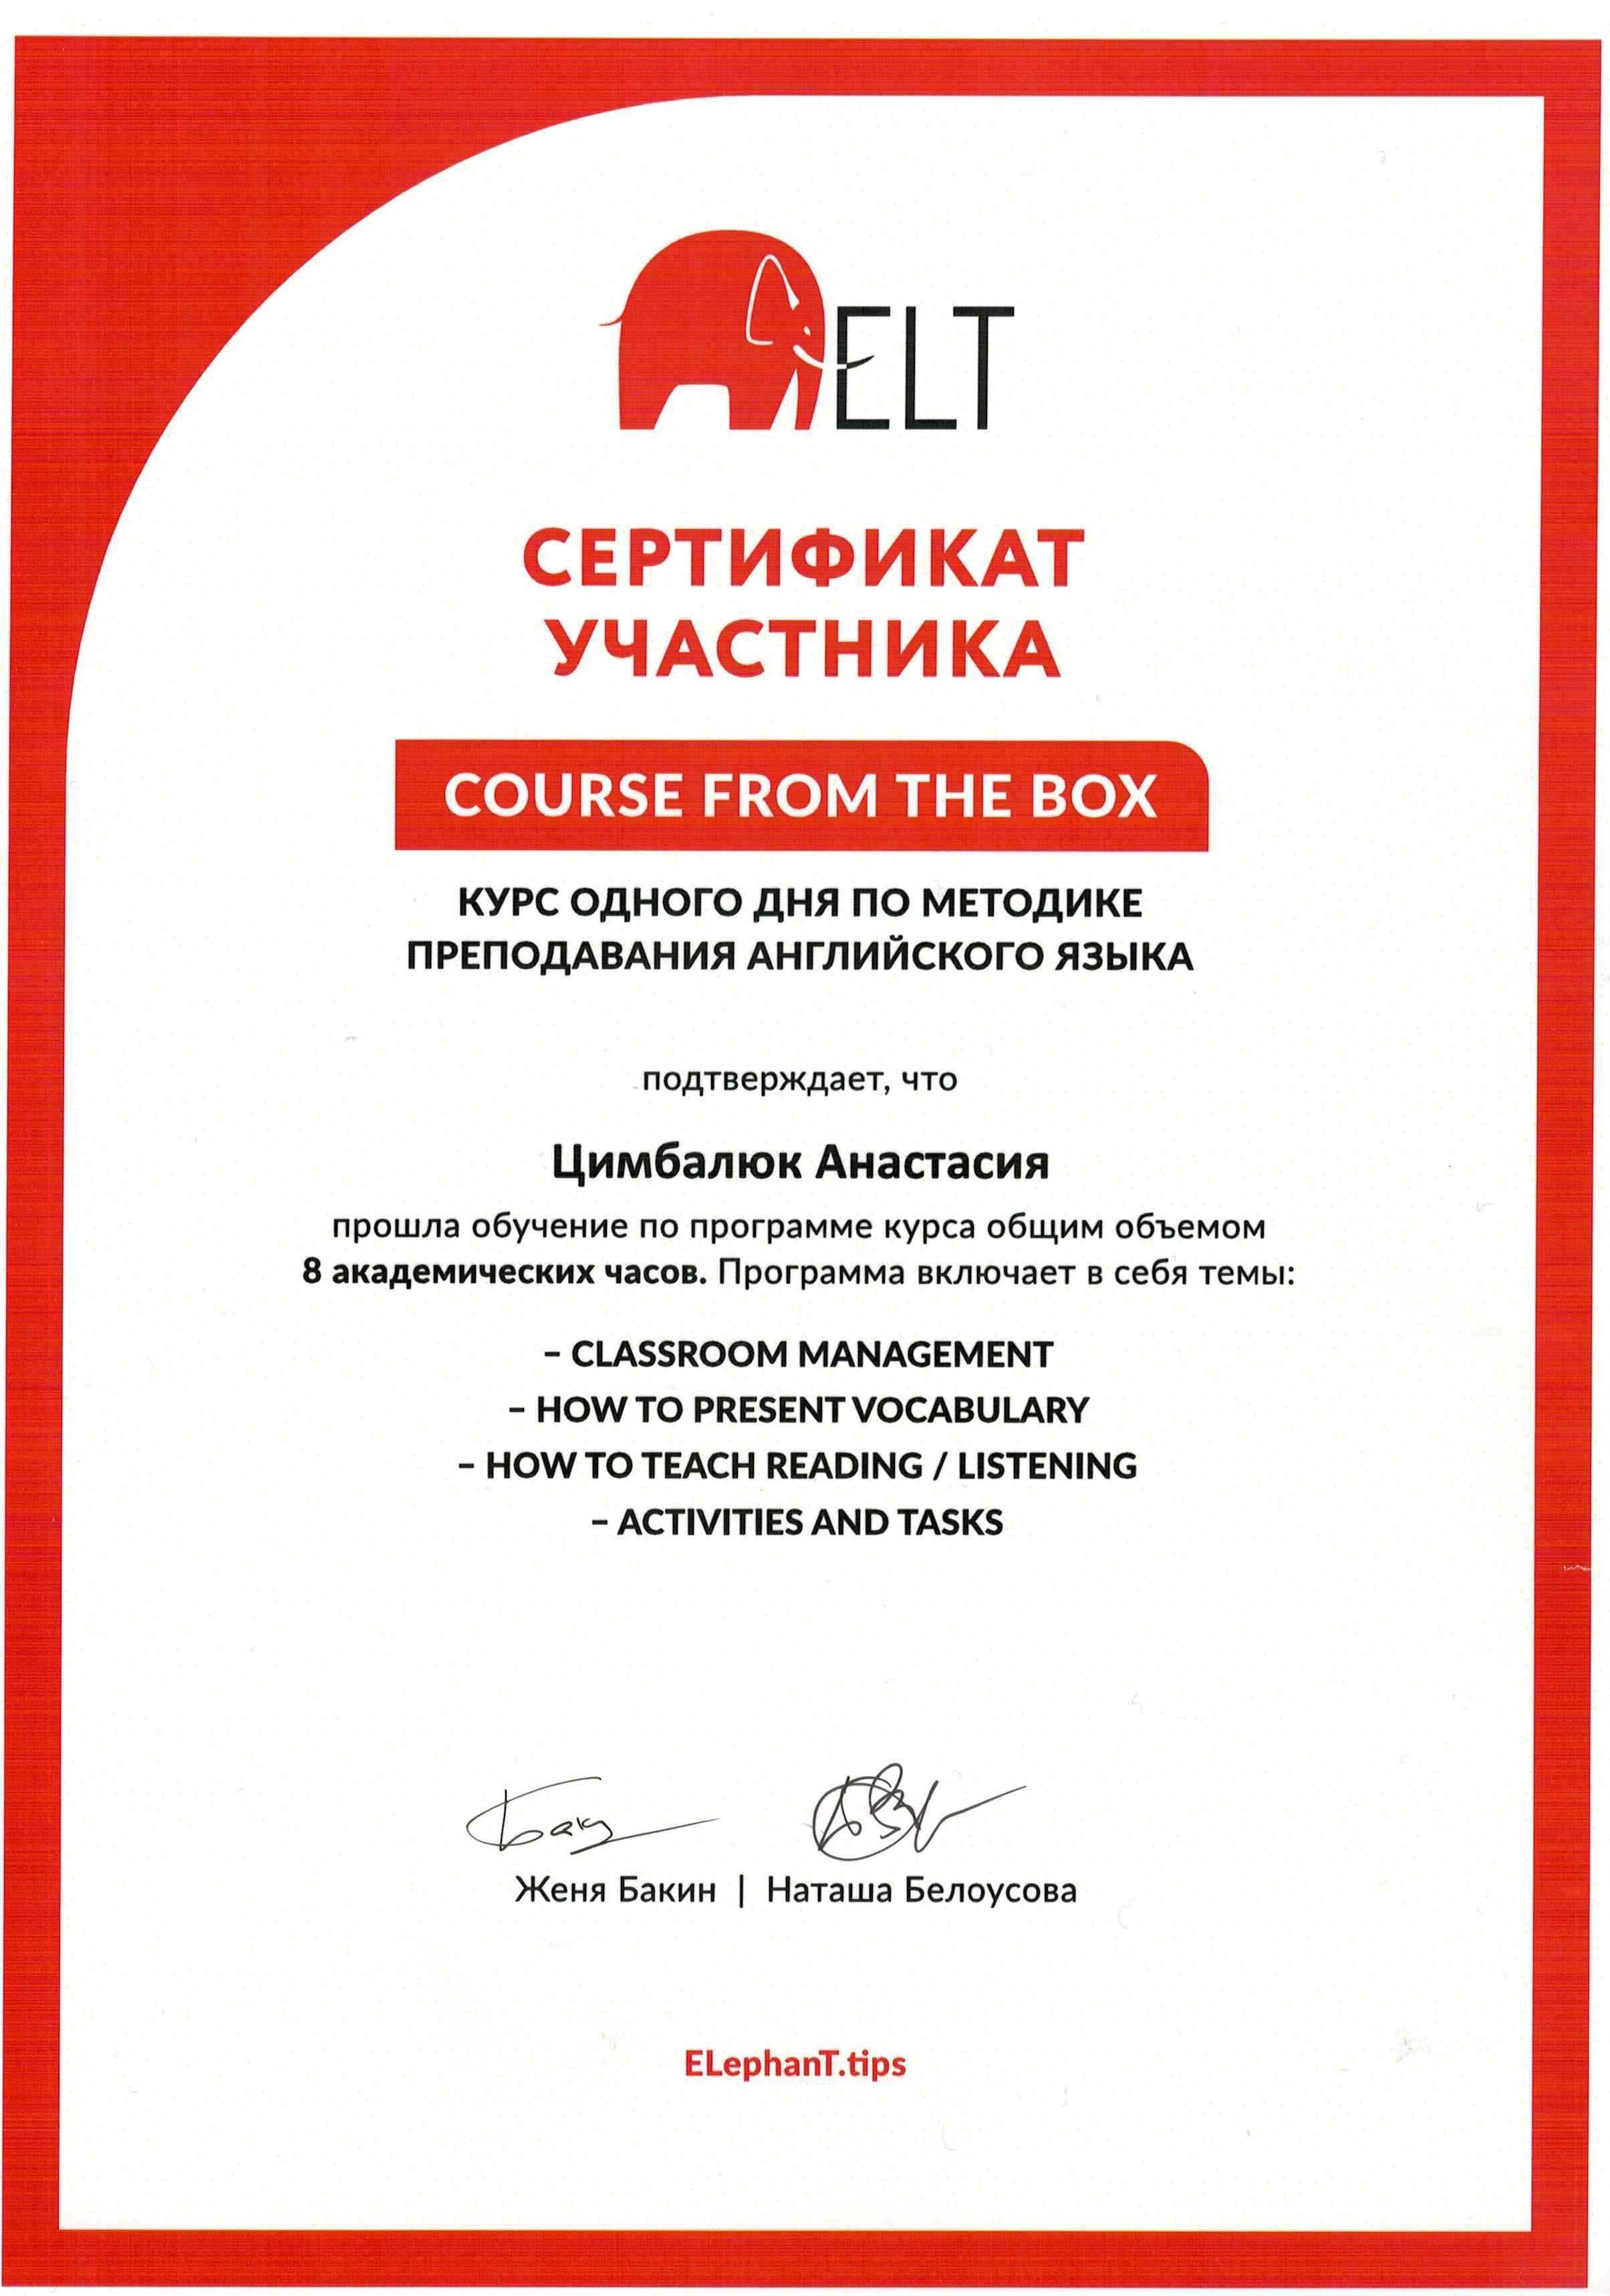 Course from the box certificate